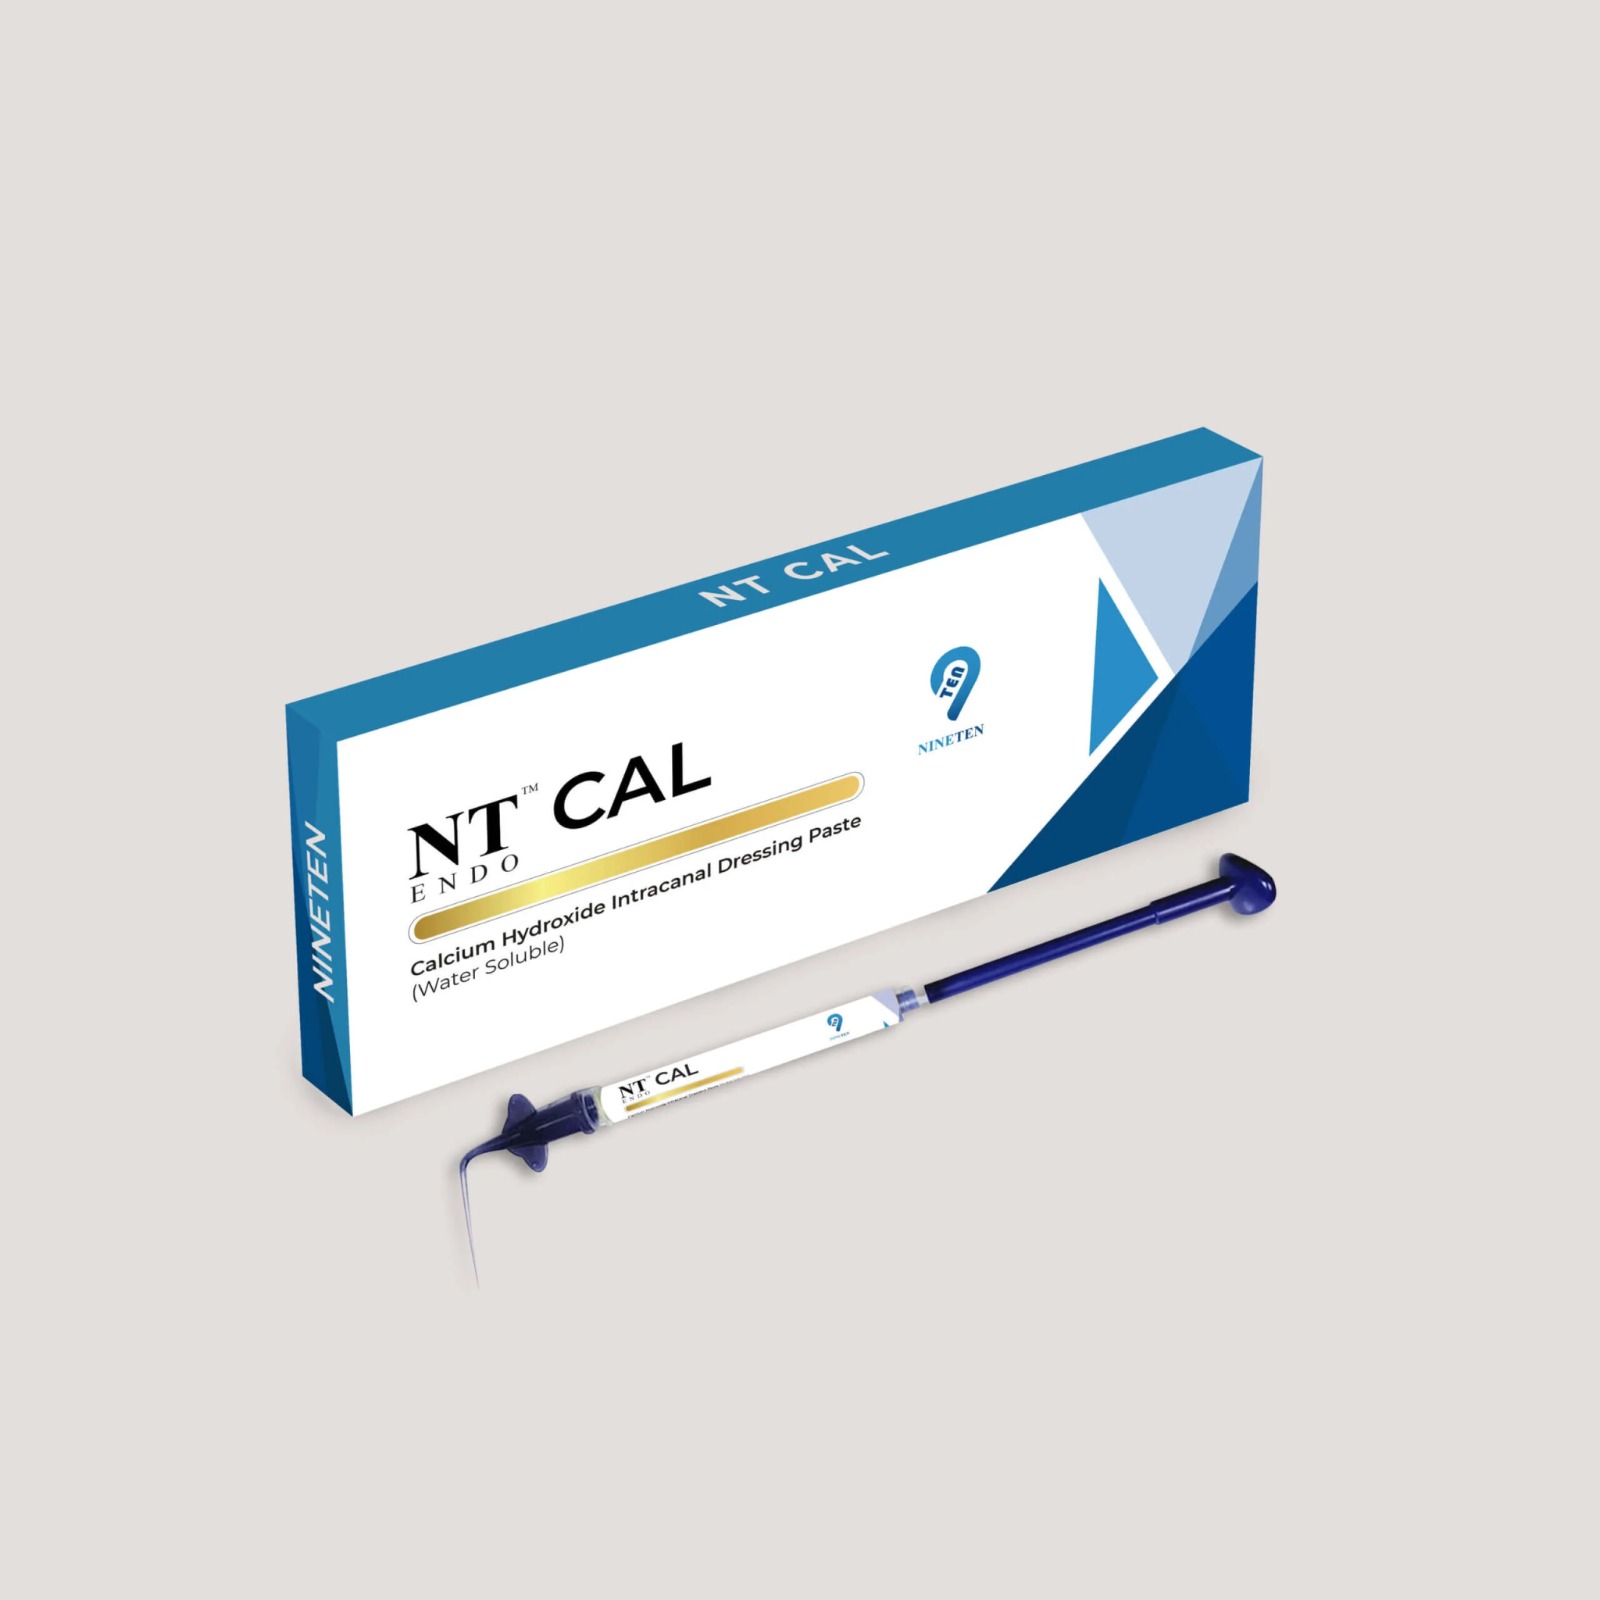 NT ENDO CAL Calcium Hydroxide Intracanal Dressing Paste (Water Soluble)